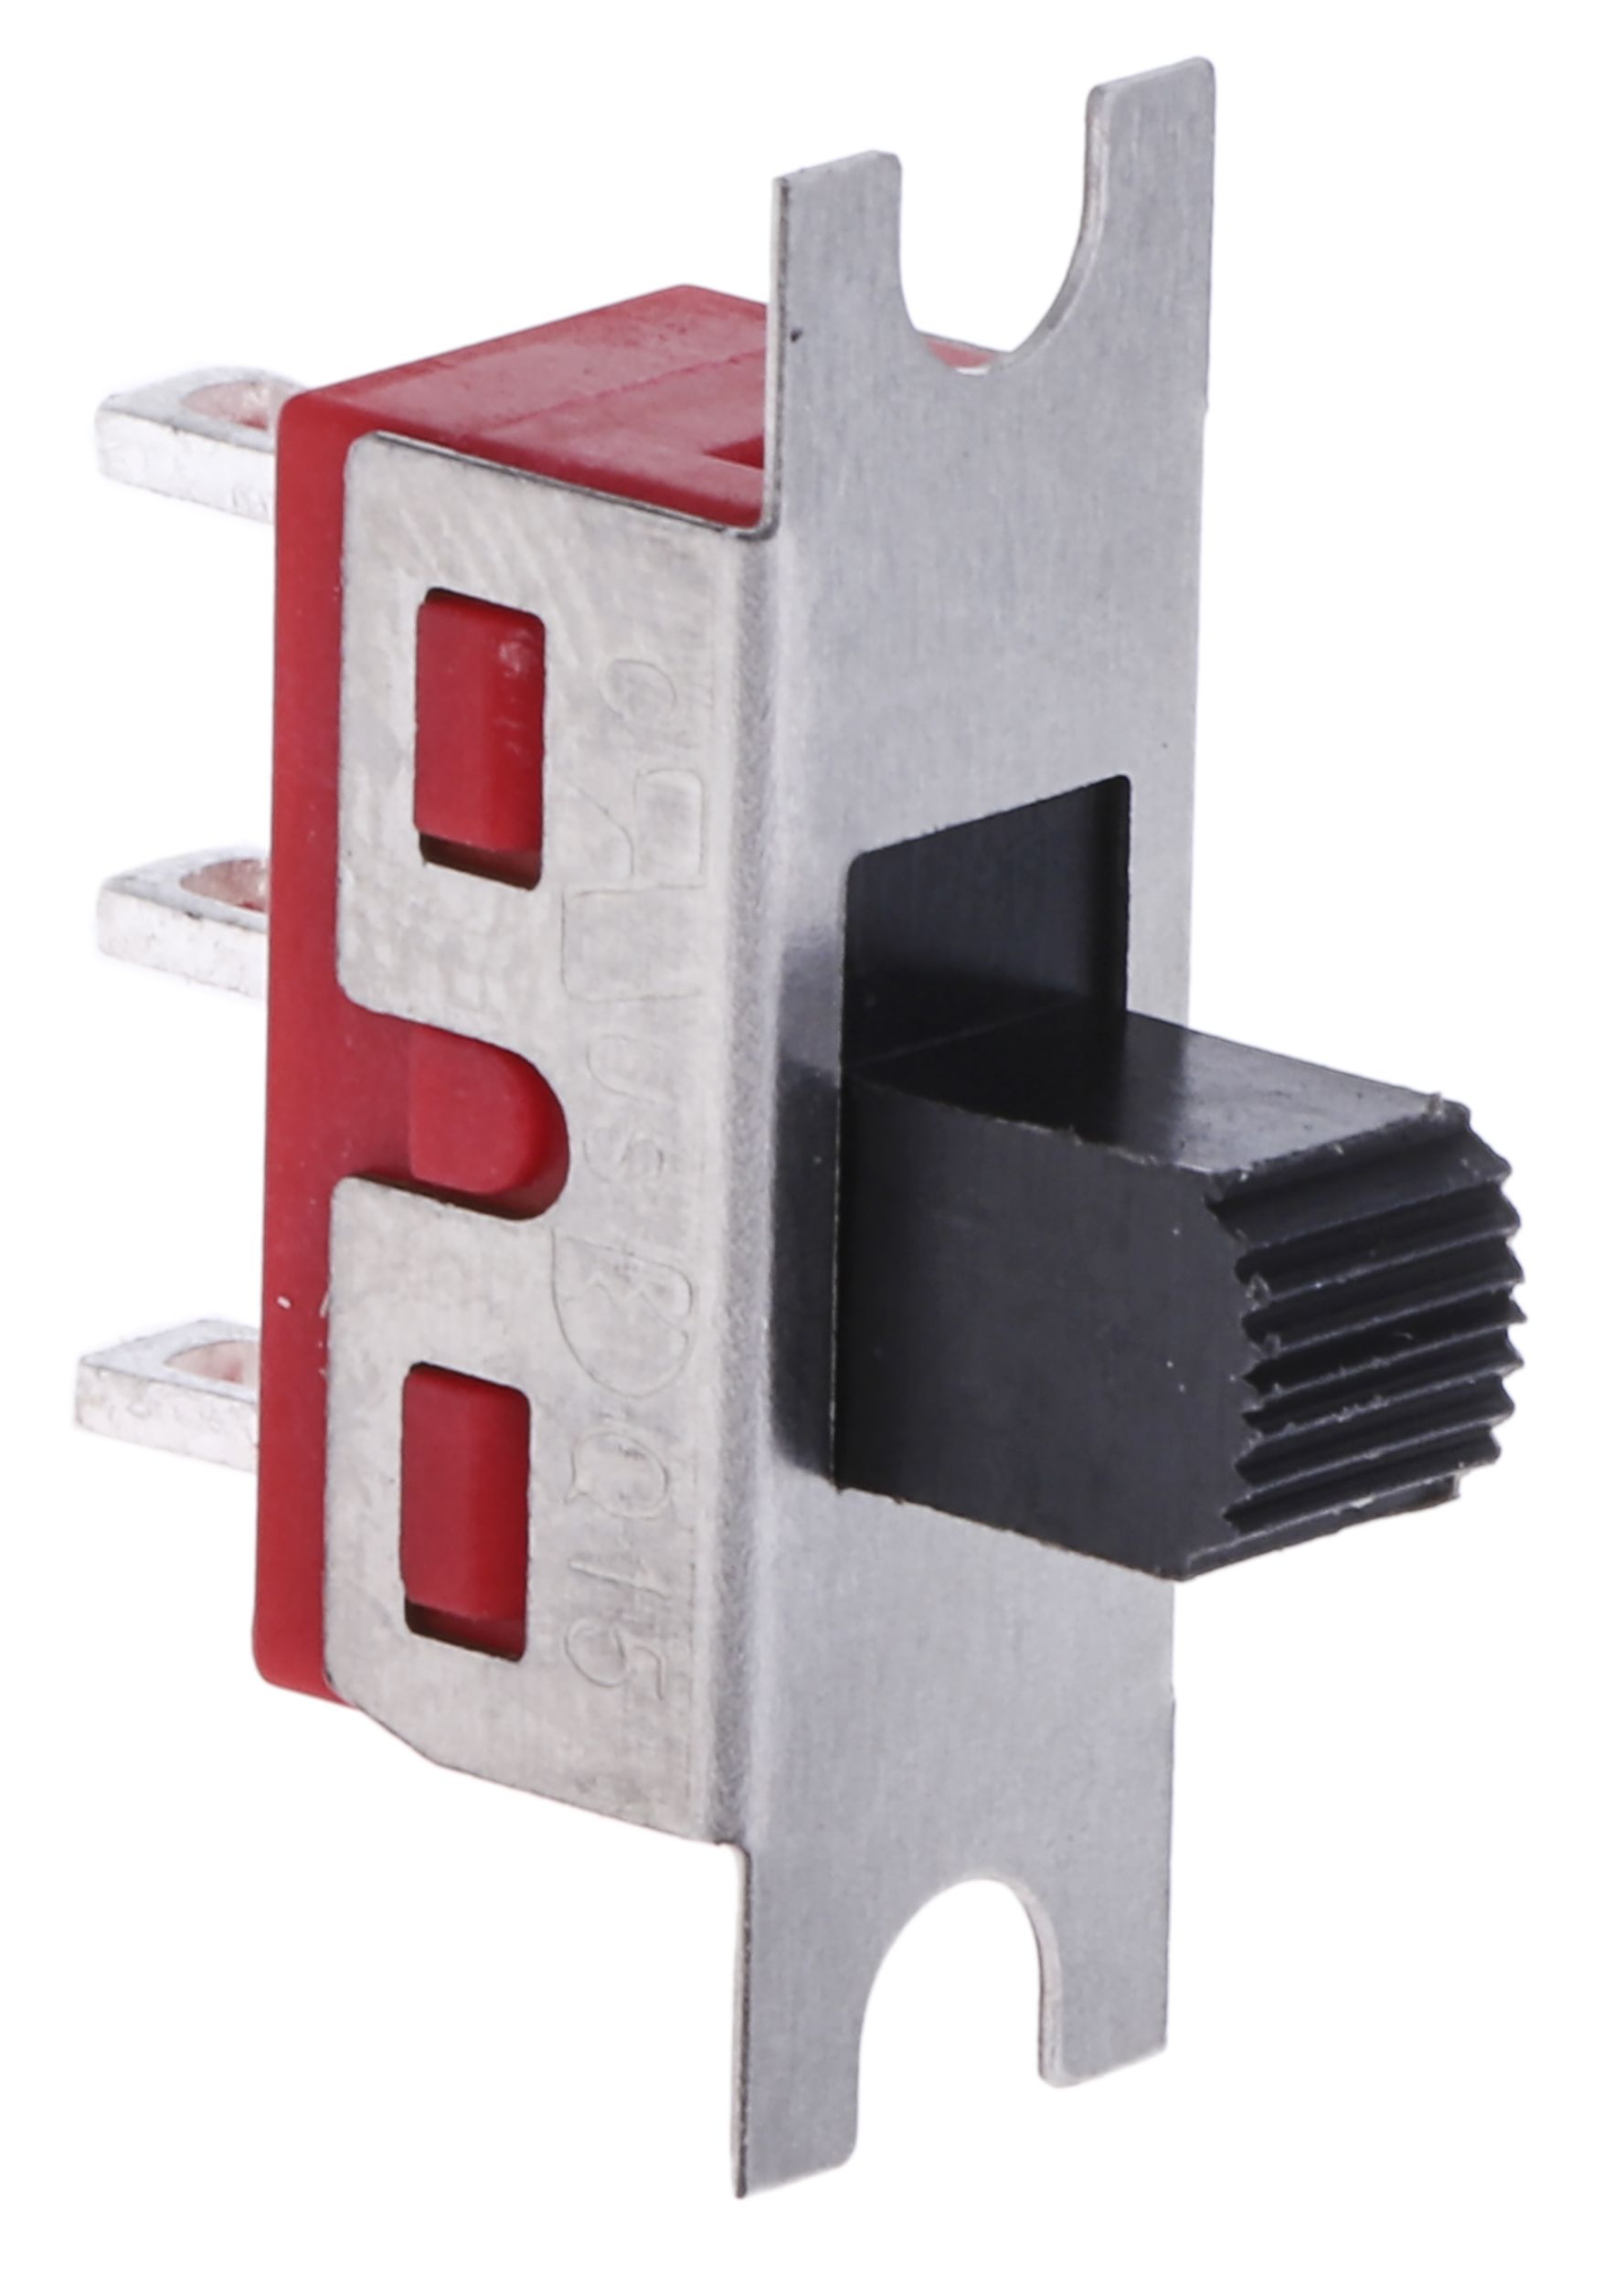 RS PRO Panel Mount Slide Switch Single Pole Double Throw (SPDT) Latching 5 A @ 28 V dc Top